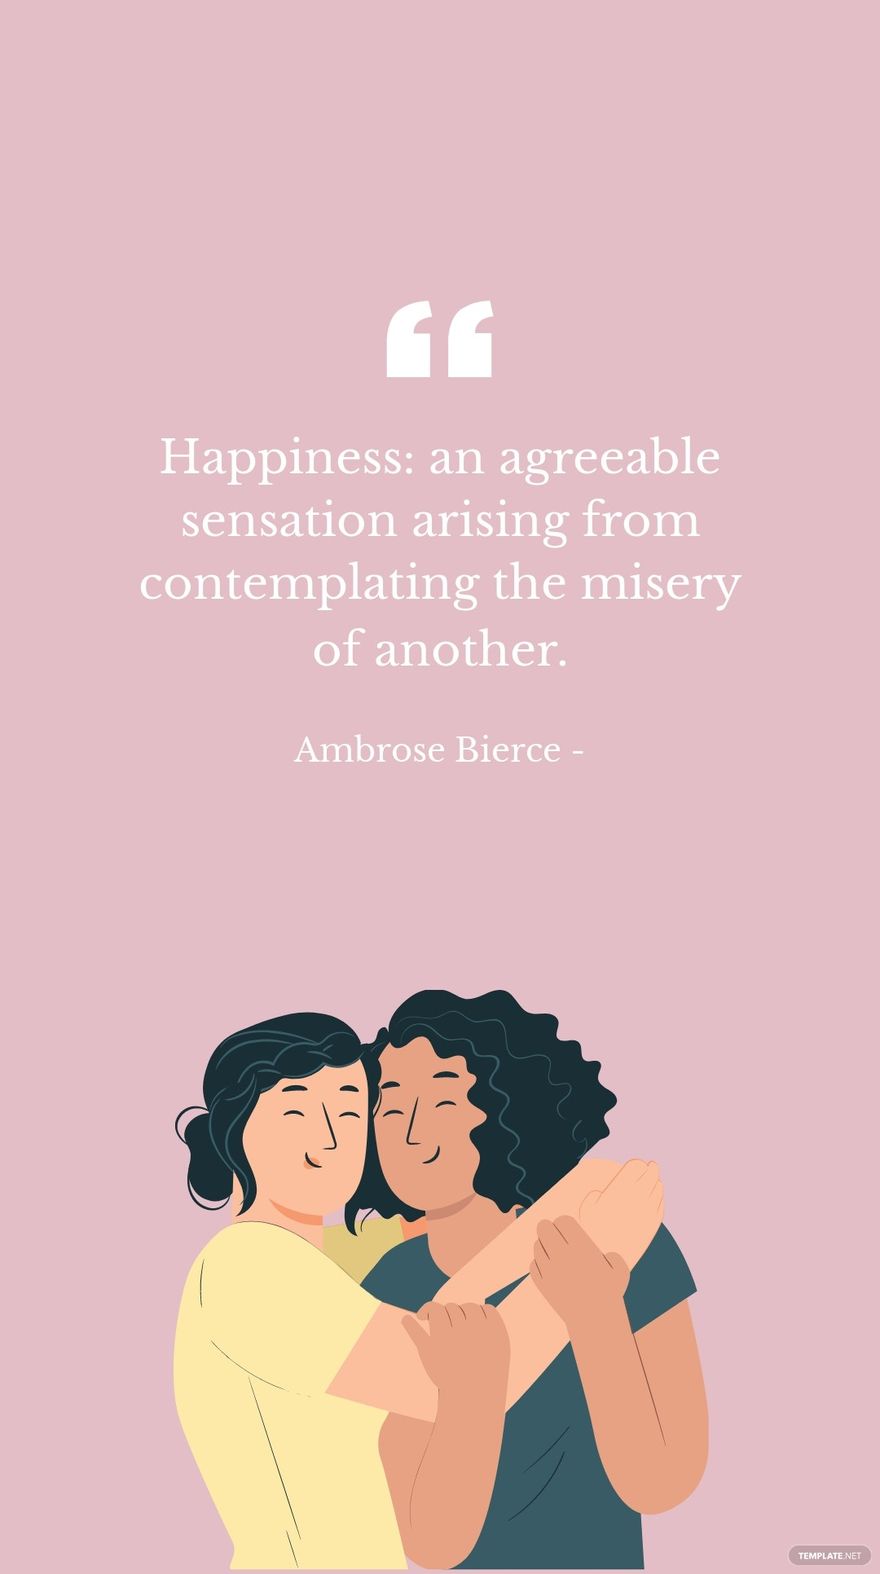 Ambrose Bierce - Happiness: an agreeable sensation arising from contemplating the misery of another.